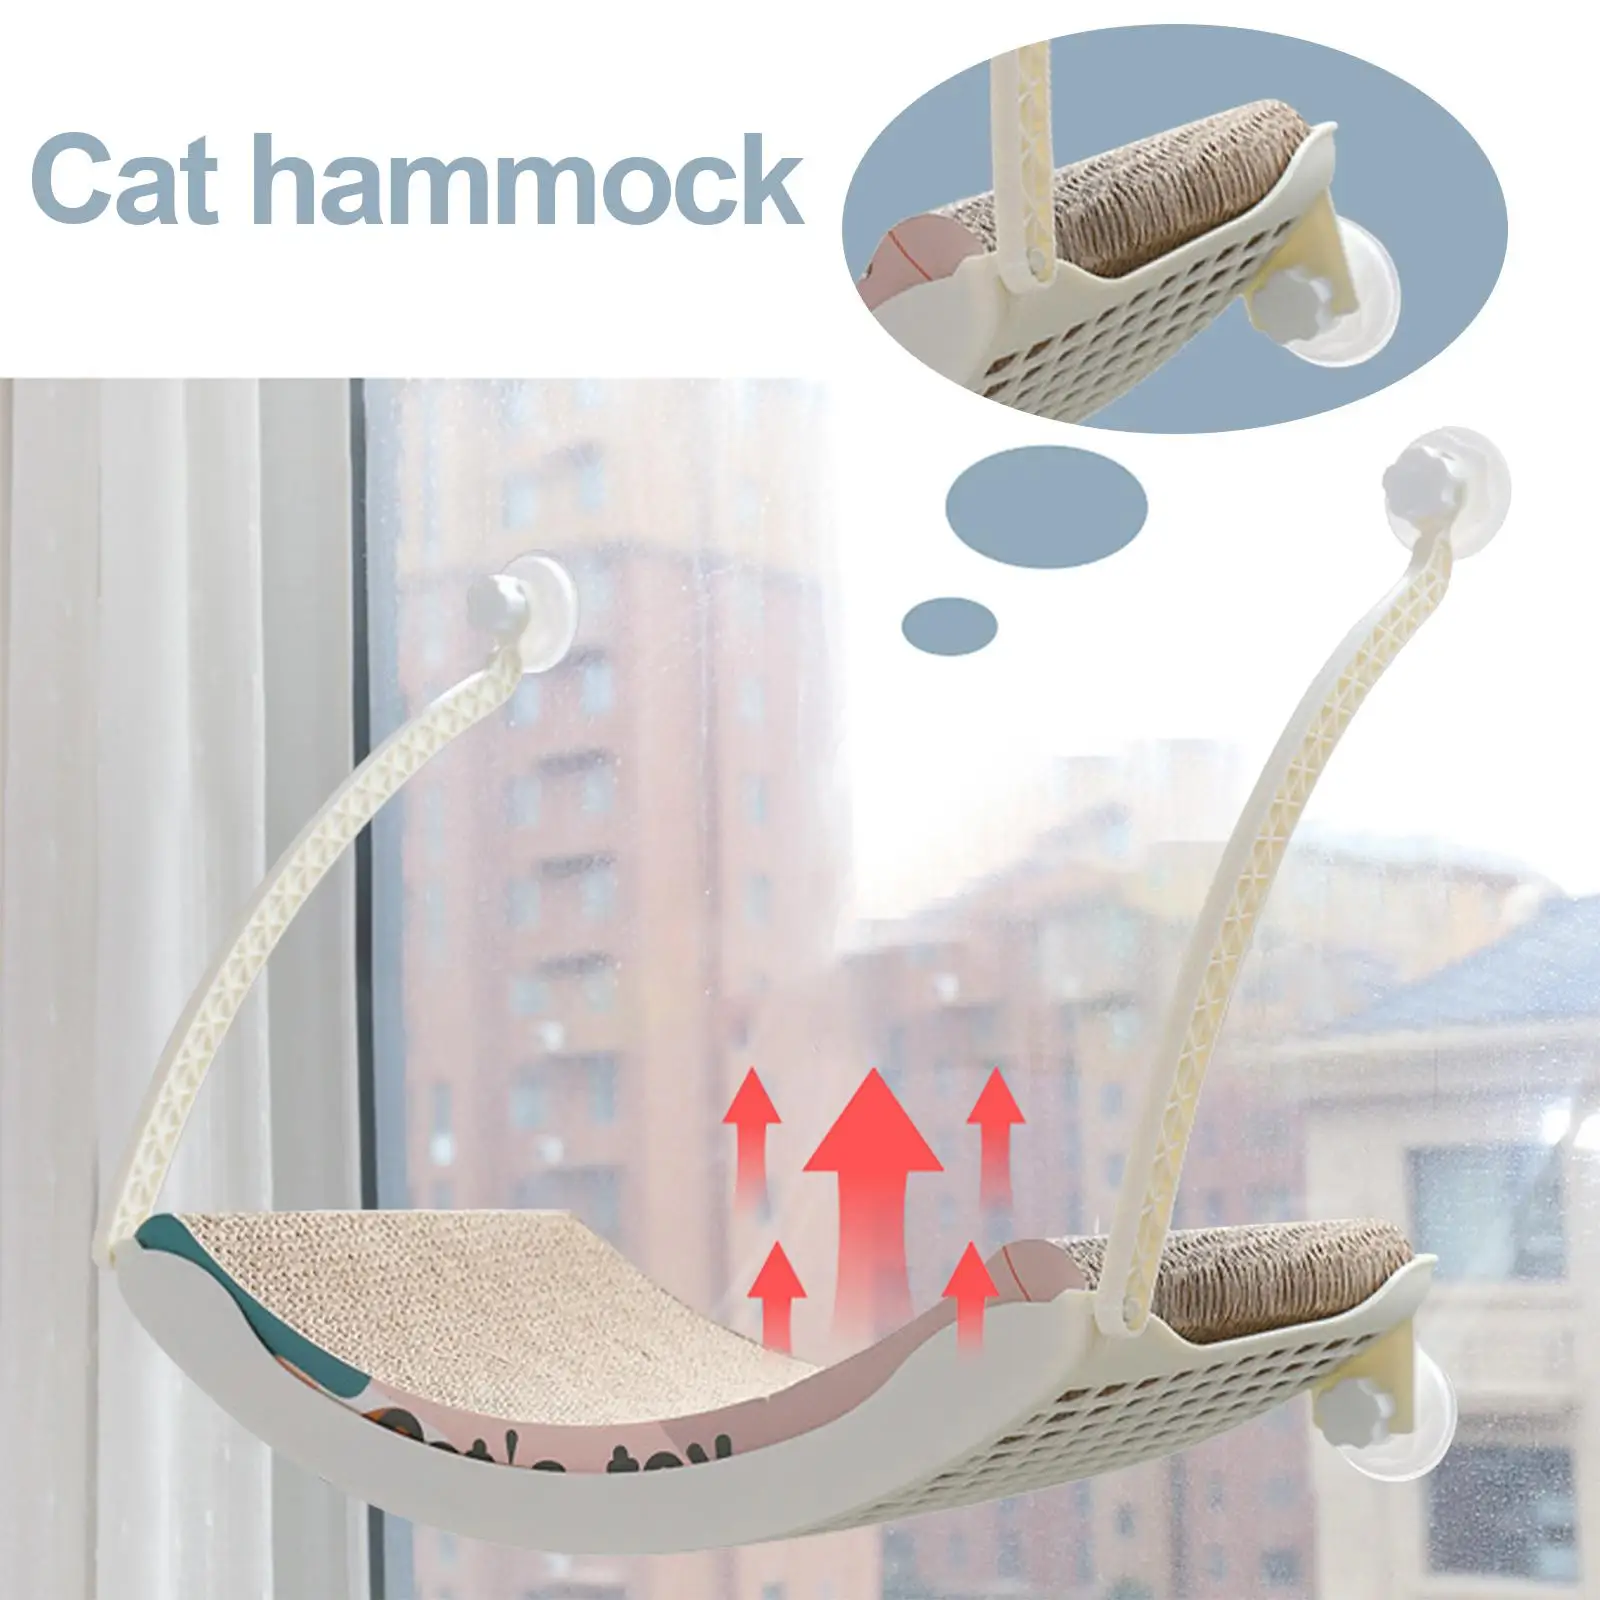 Pet Bed Suction Cup Safety Hanging Seat Perches Cat Window Hammock Shelf for Sun Bathing Resting Basking Indoor